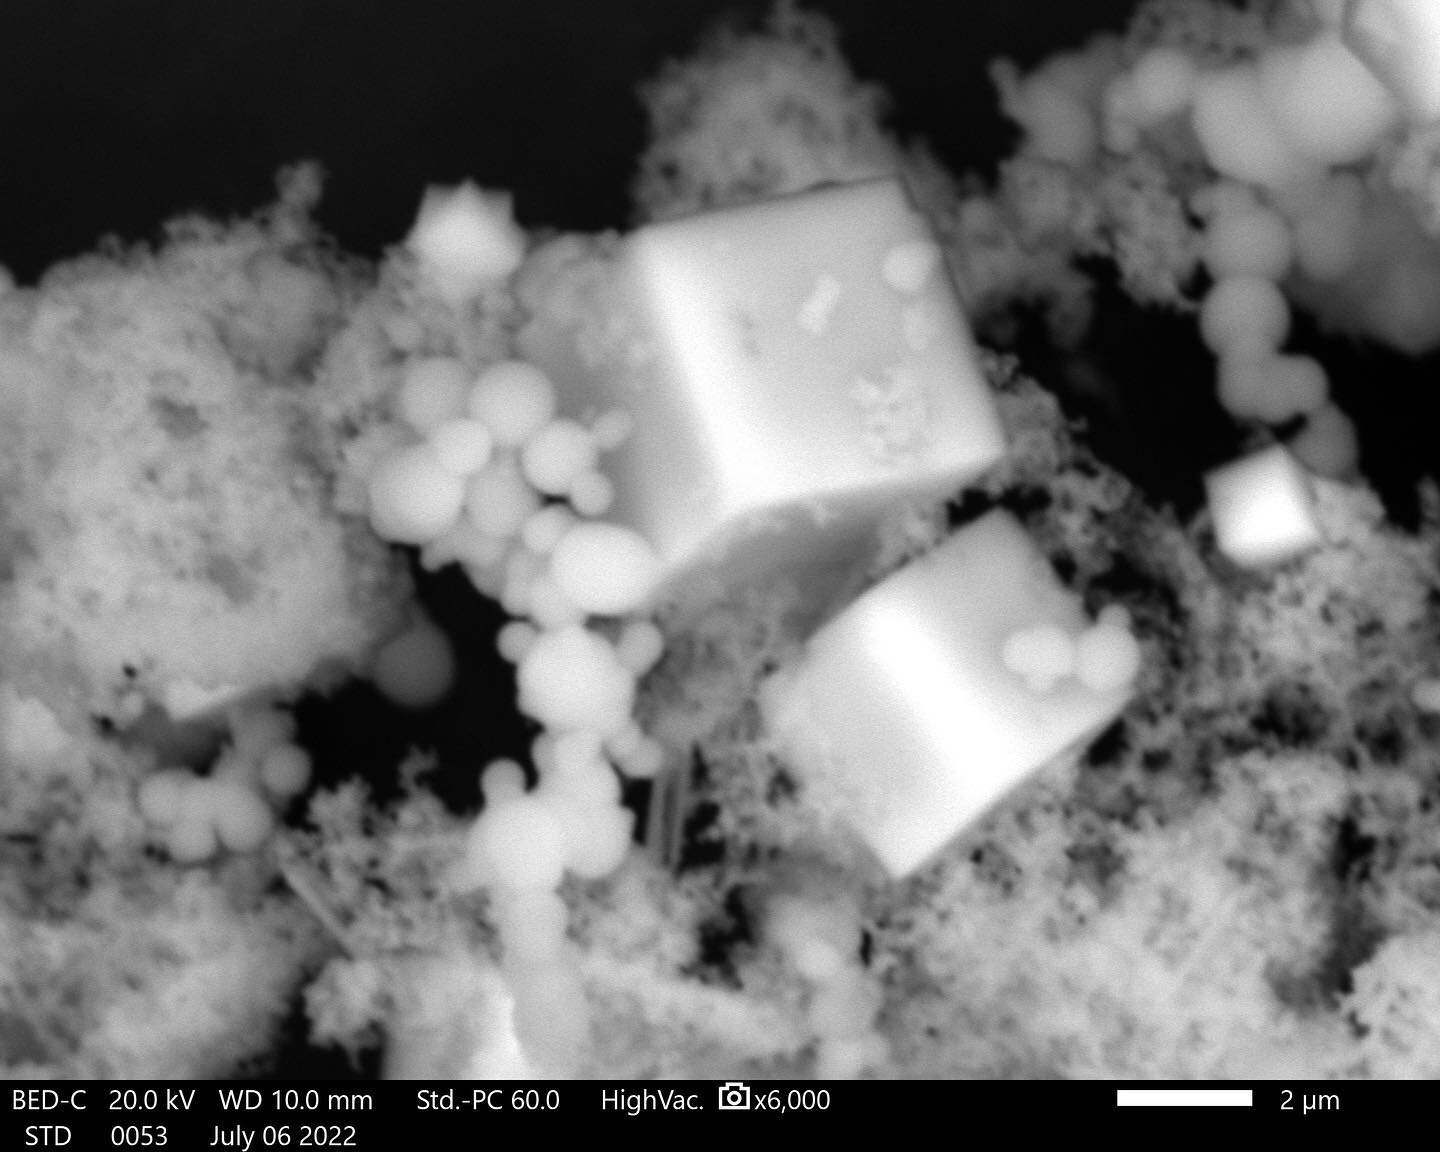 Today at the lab we were able to see zeolites under a Scanning Electron Microscope (SEM). Zeolites are a type of mineral that has the capacity to &ldquo;encapsulate&rdquo; lead.  We are testing this material for lead remediation in contaminated soil 